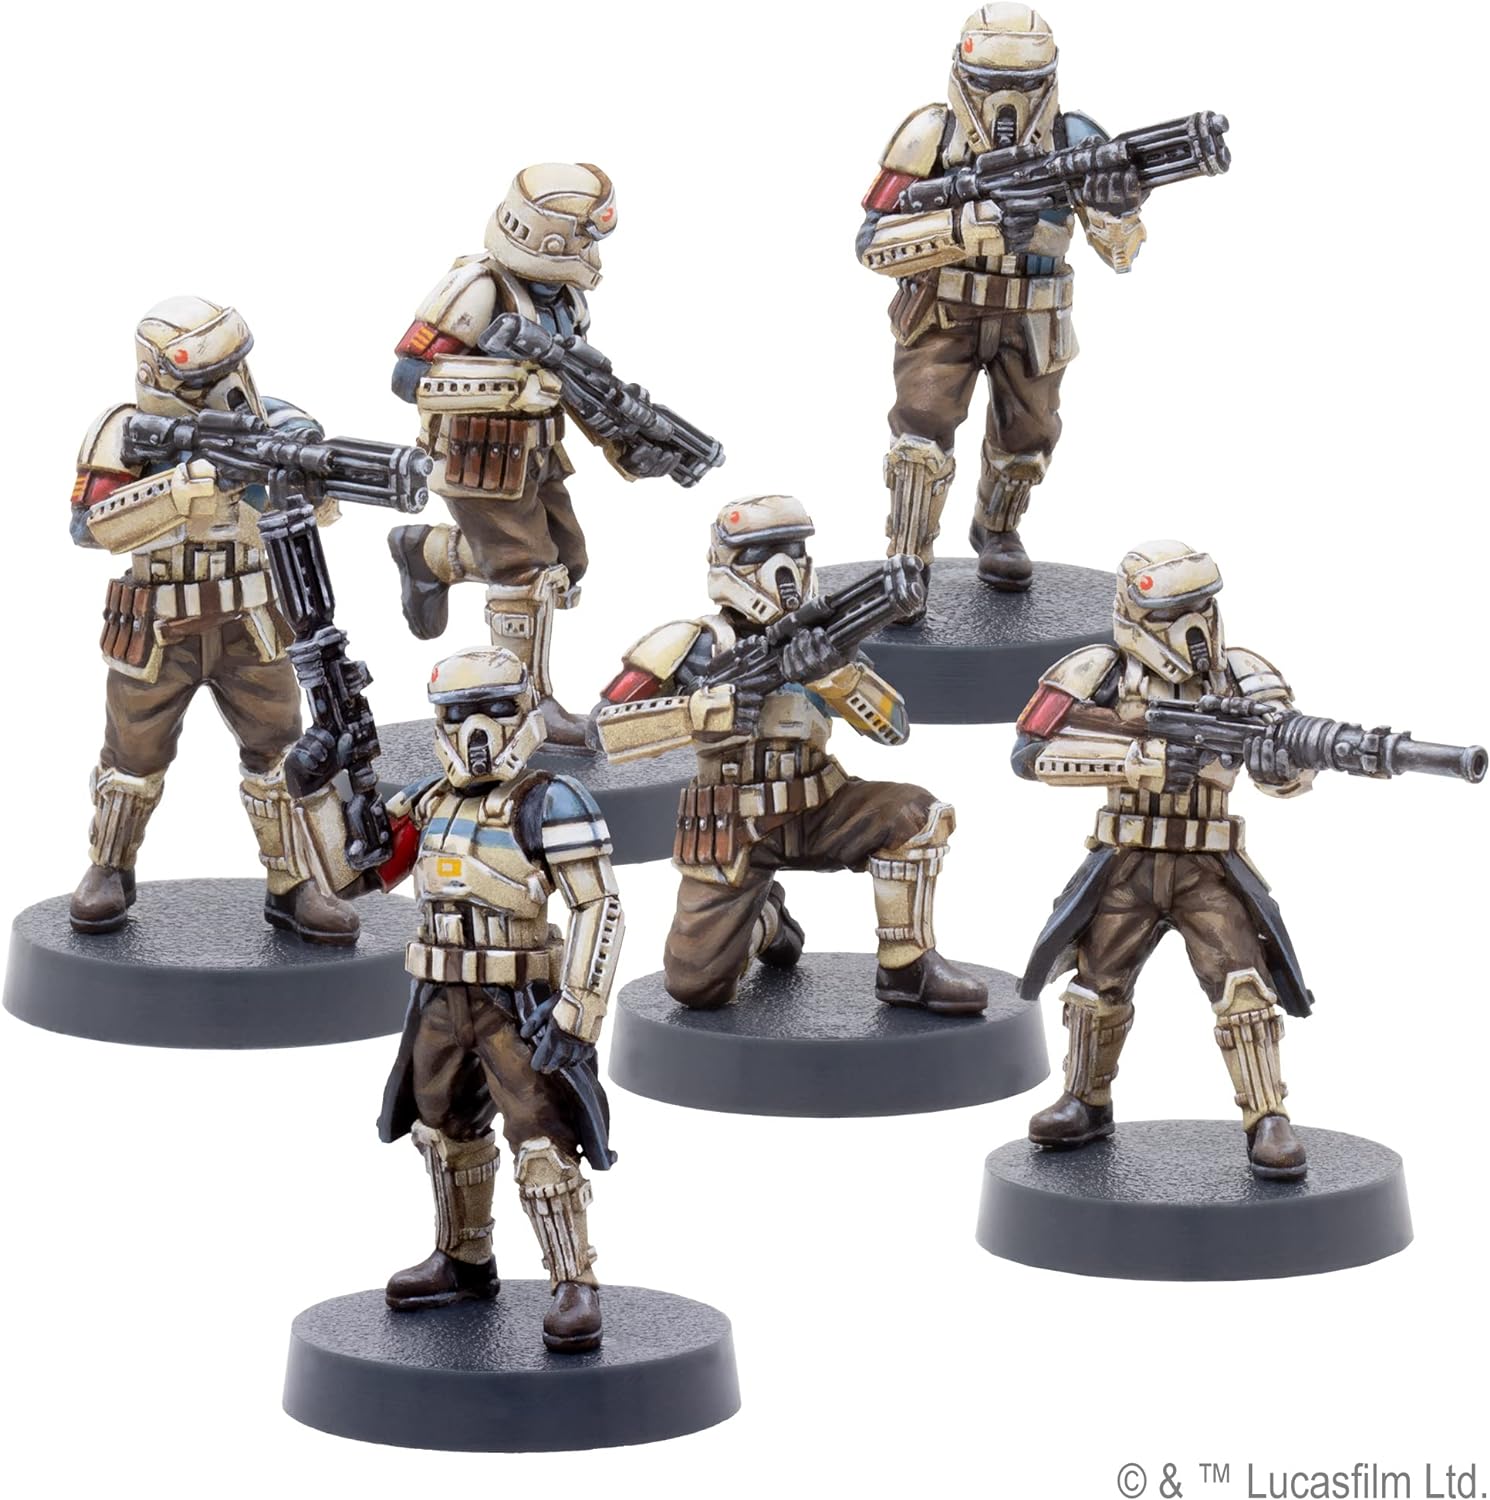 Star Wars Legion: Imperial Shoretroopers Unit Expansion - Loaded Dice